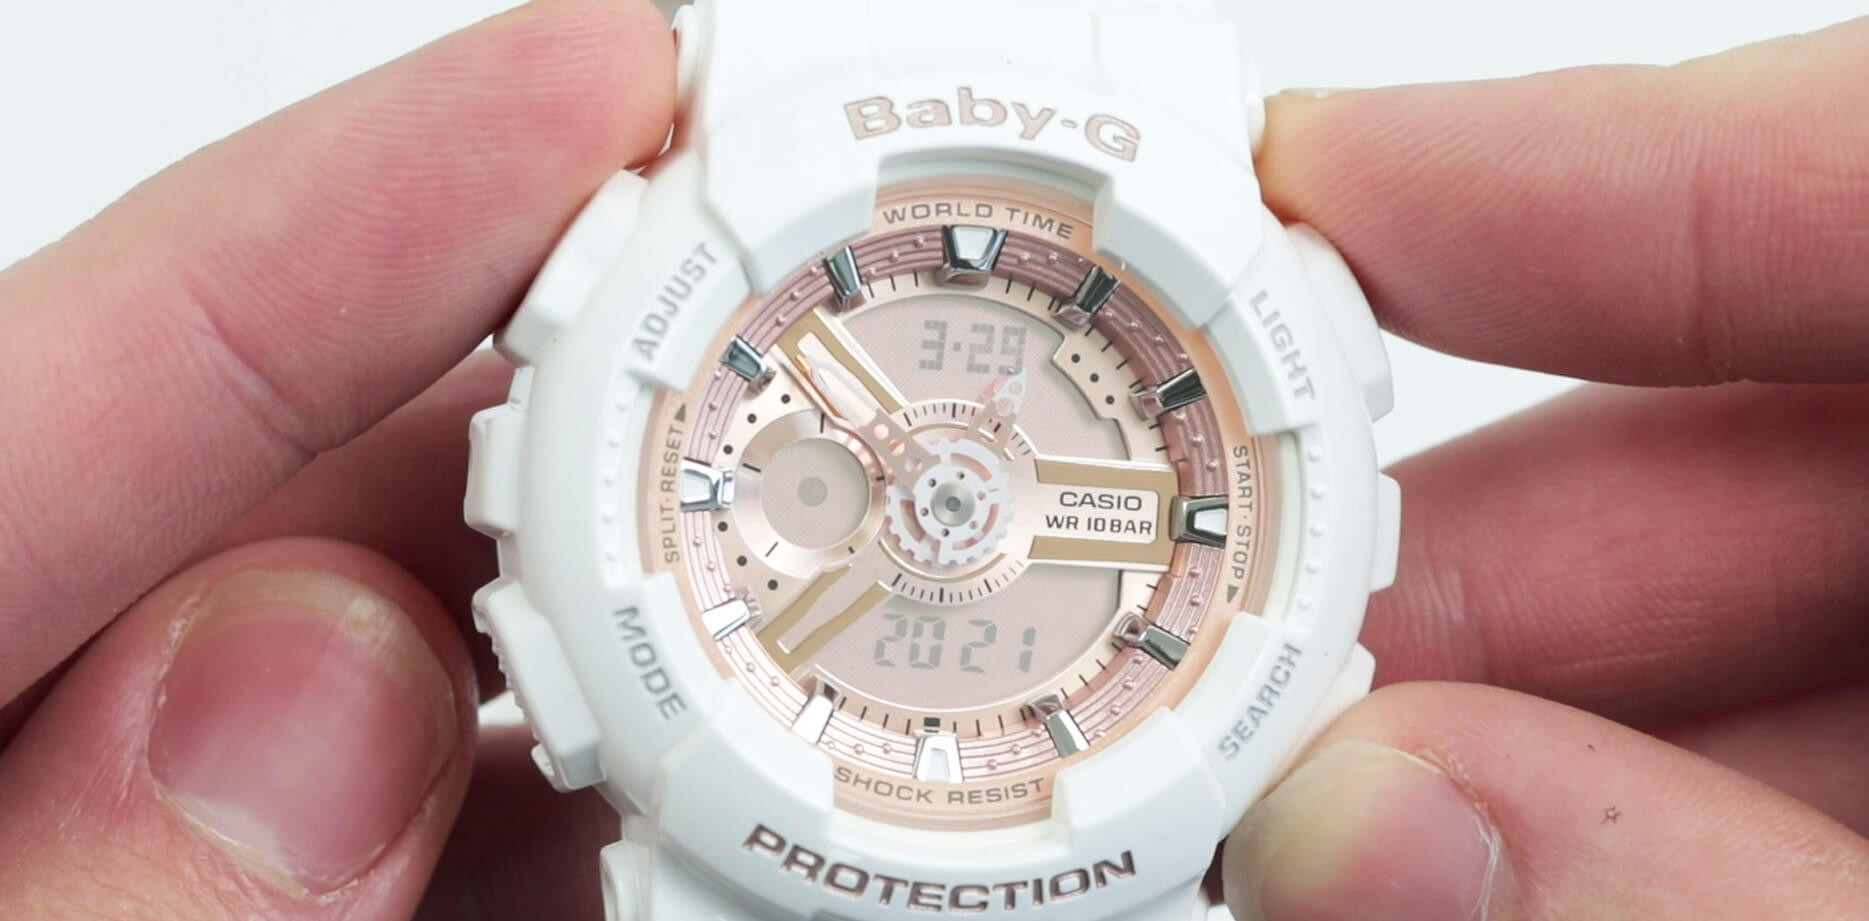 how to change time baby-g watch: step 10